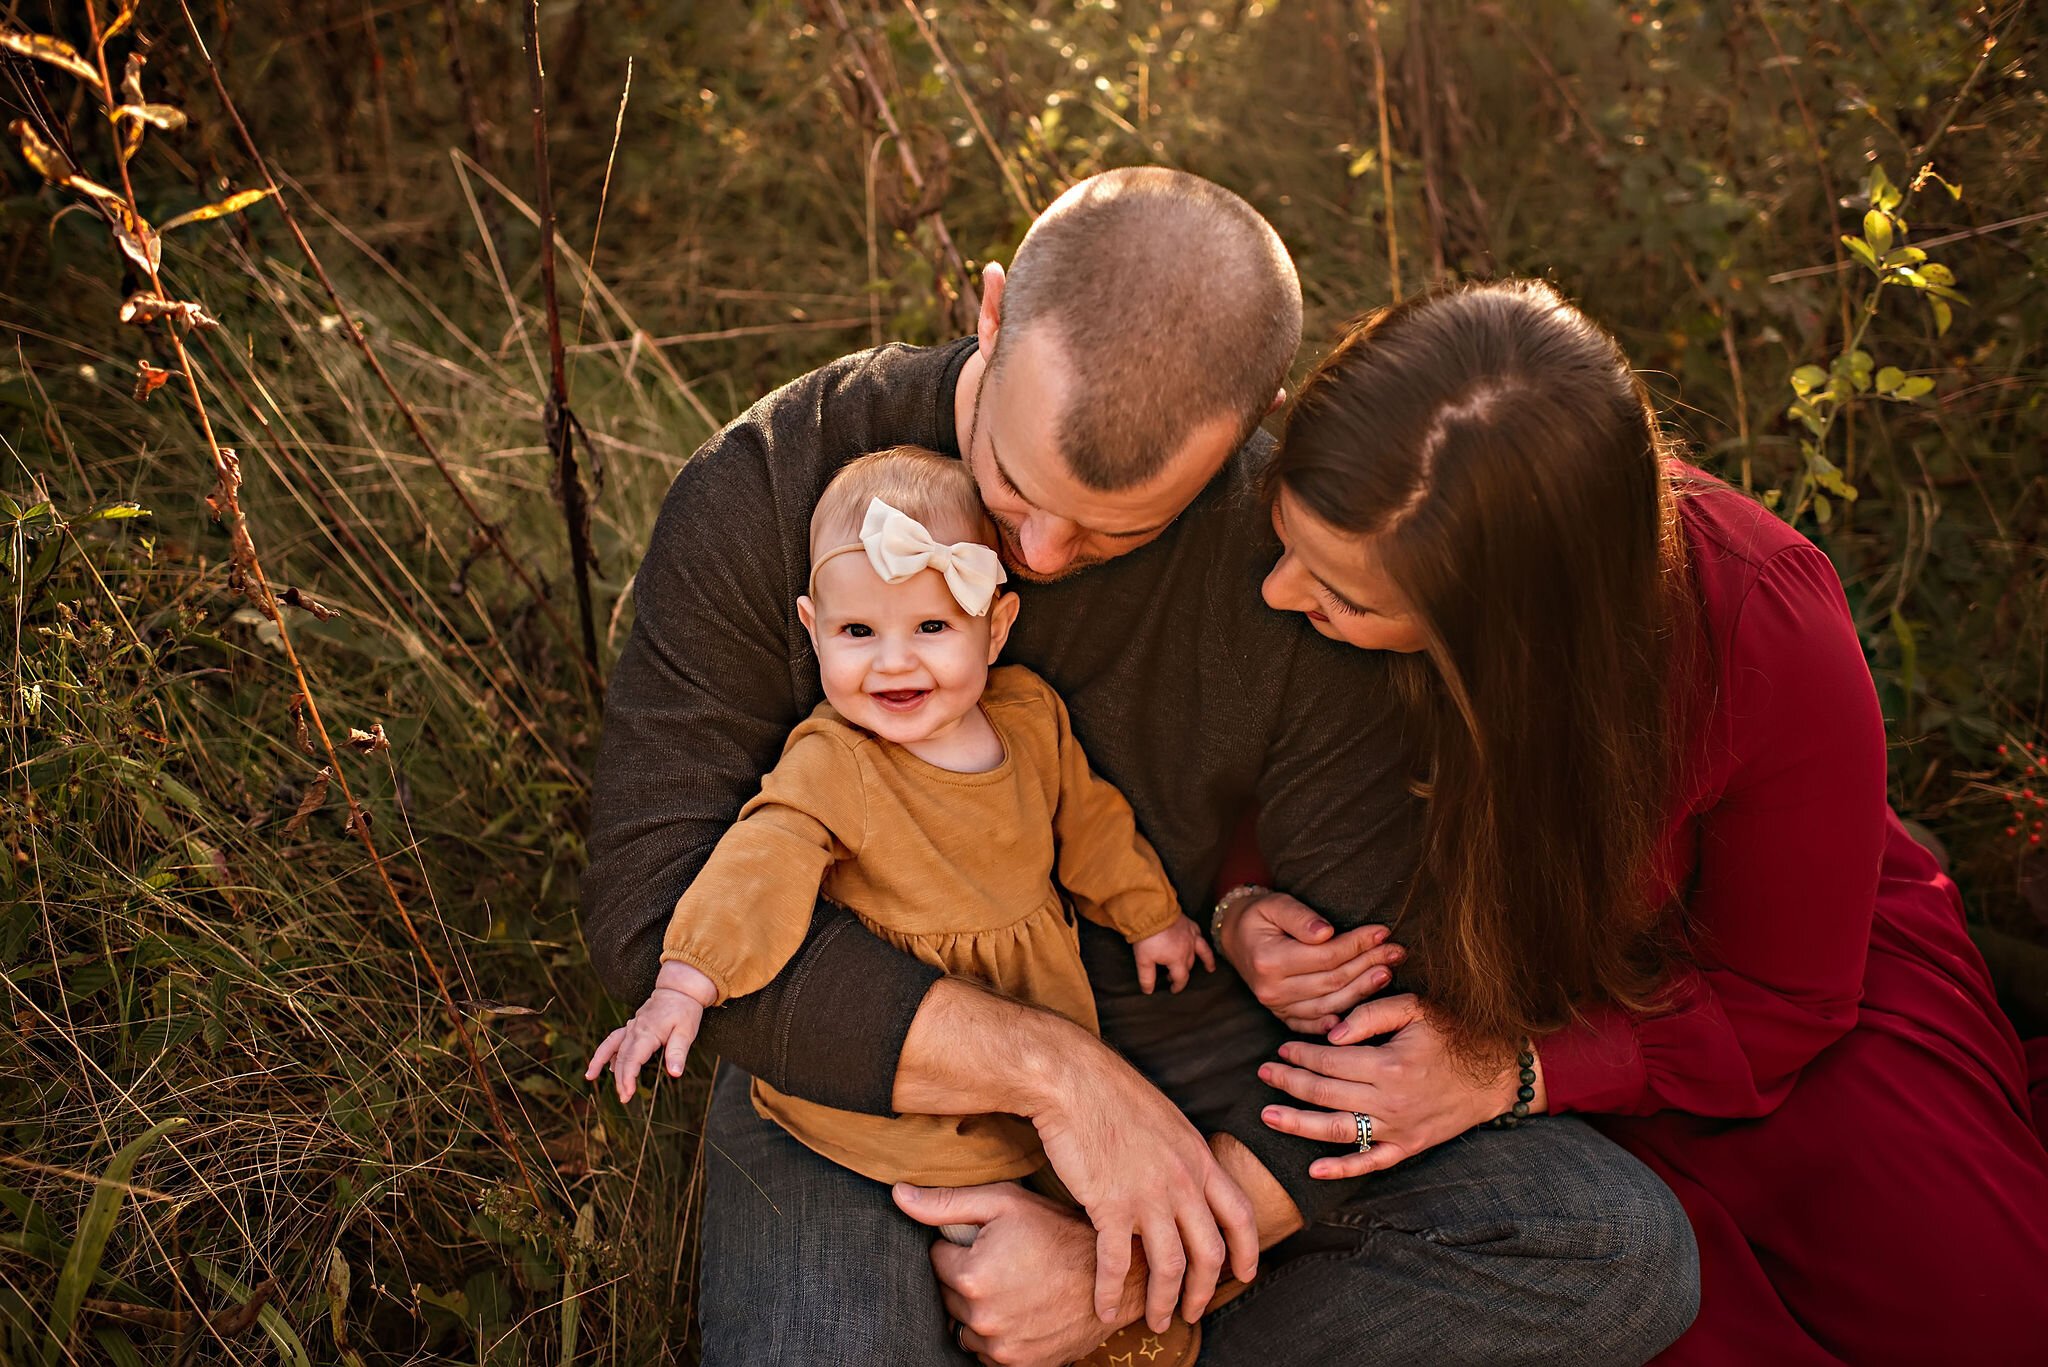 cleveland-ohio-fall-family-photo-session-outdoors-lauren-grayson-photography (2).jpeg